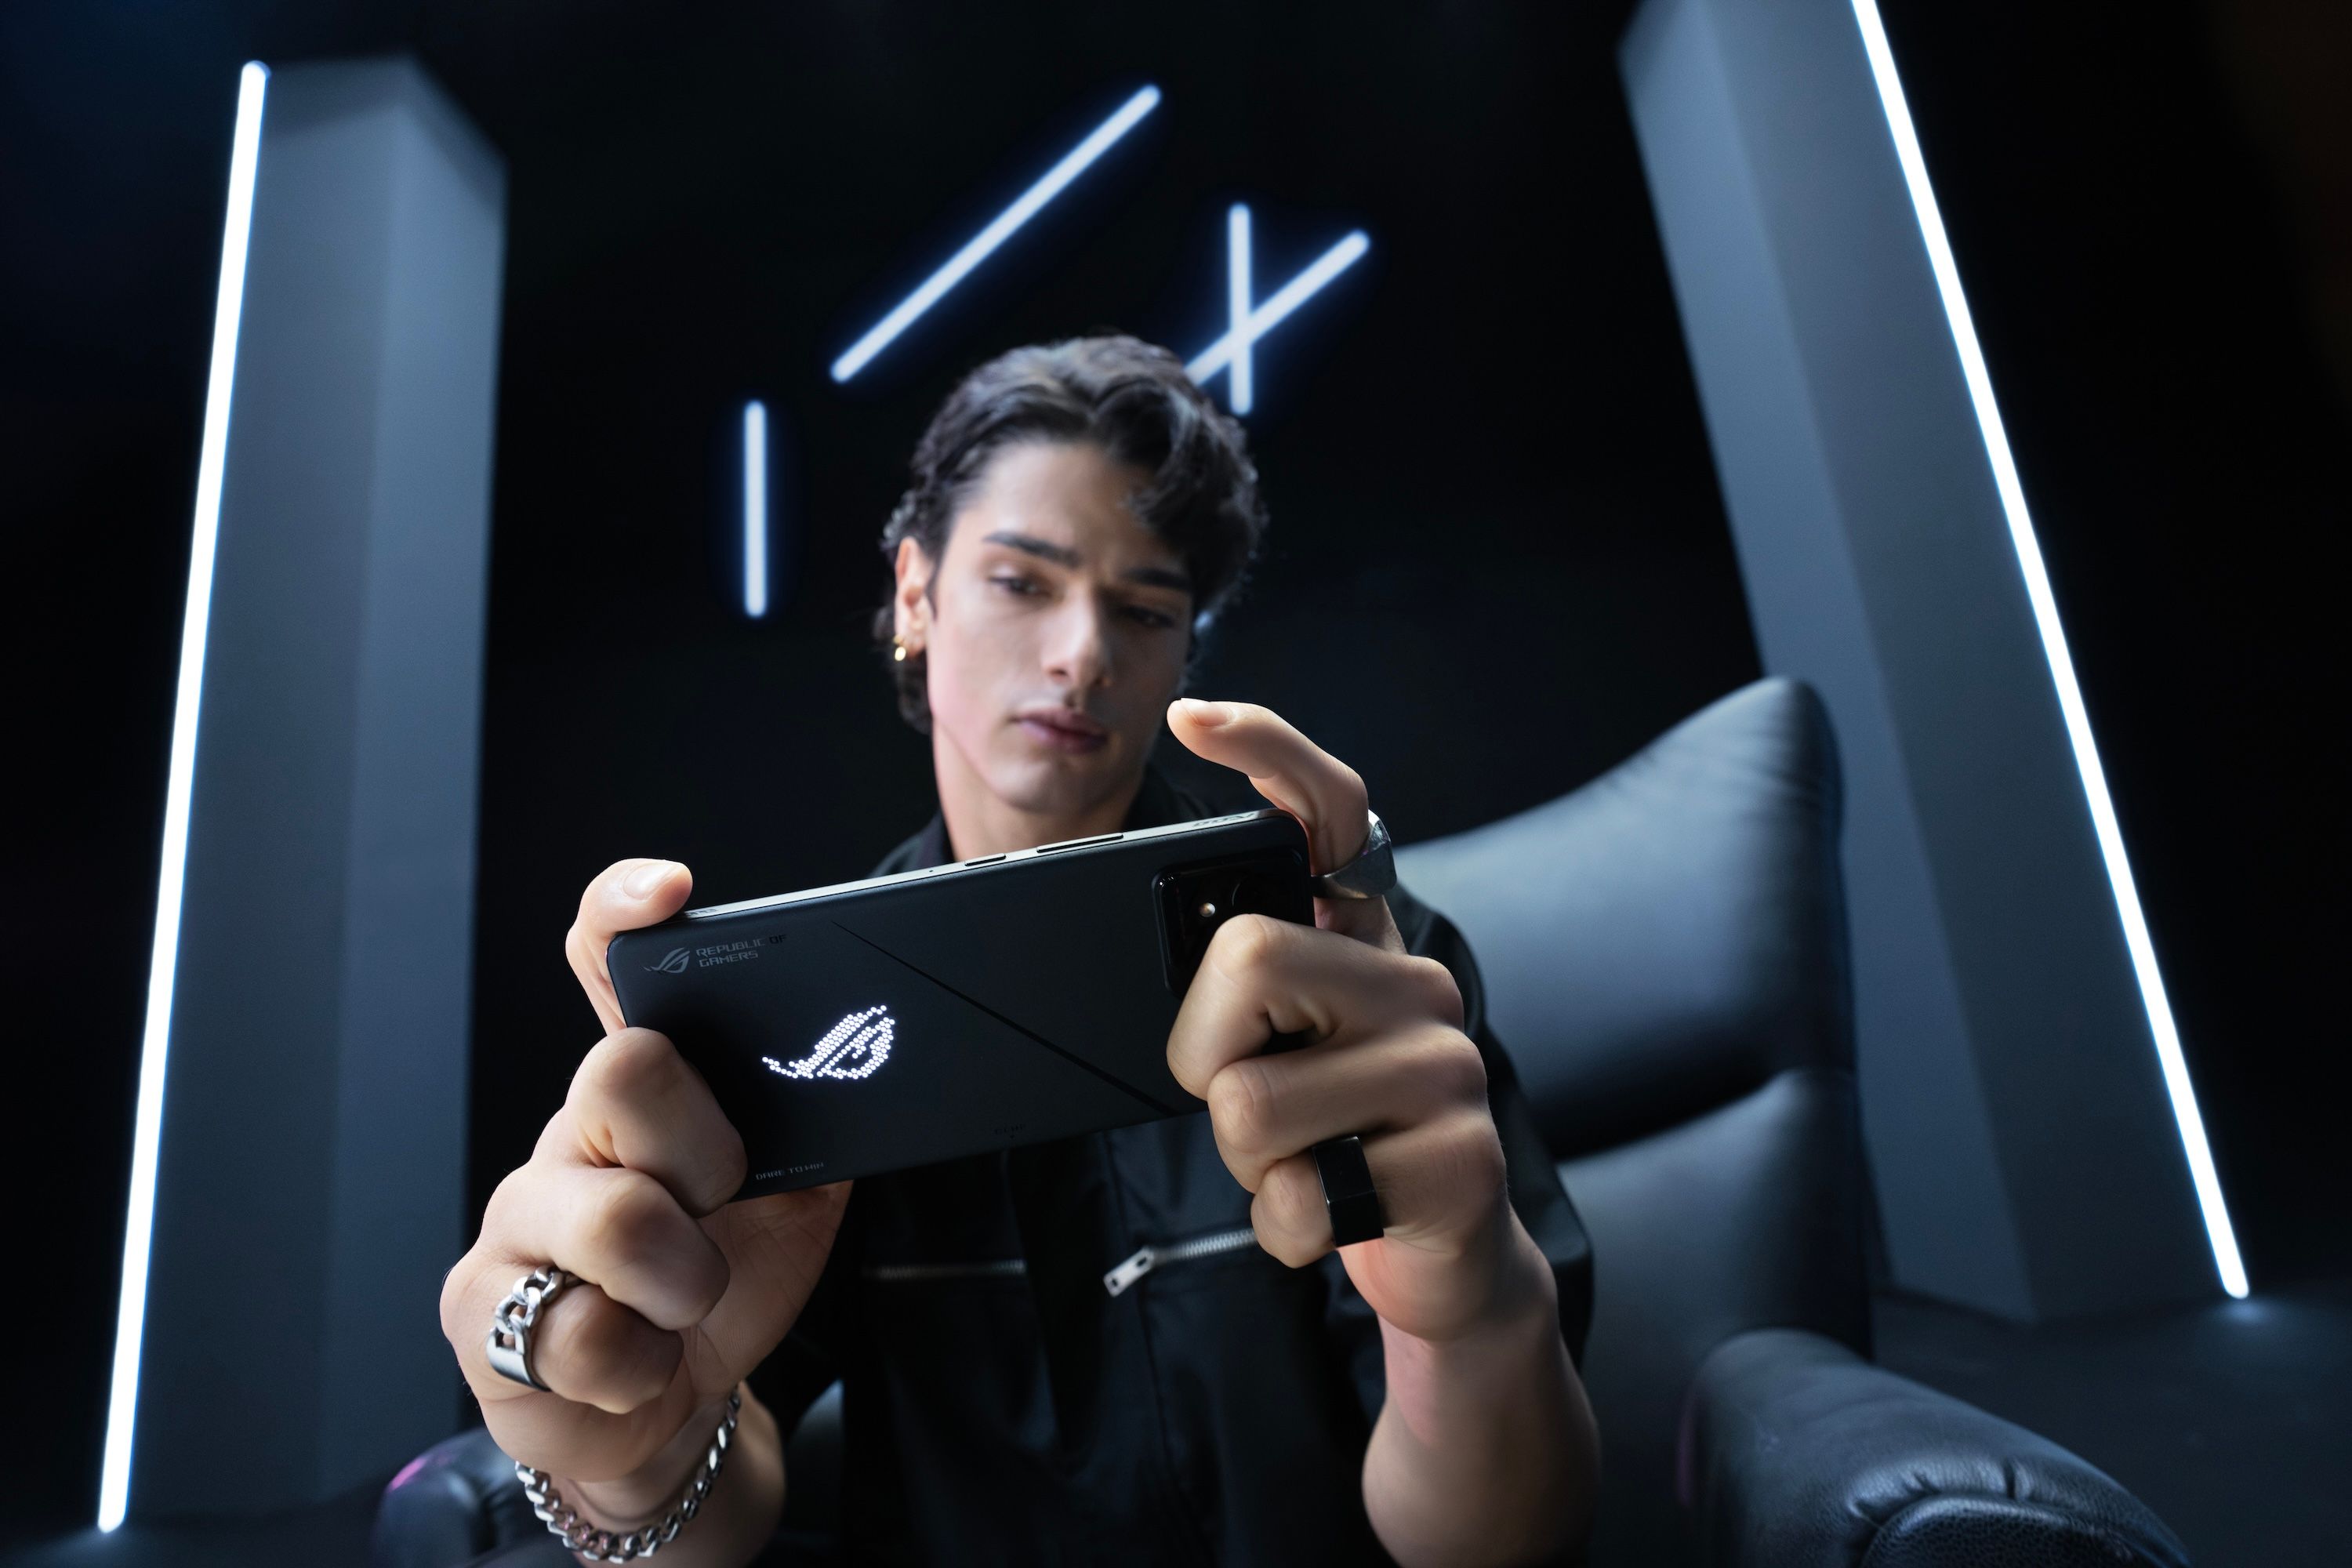 Asus ROG Phone 8: News, specs, price, and release window